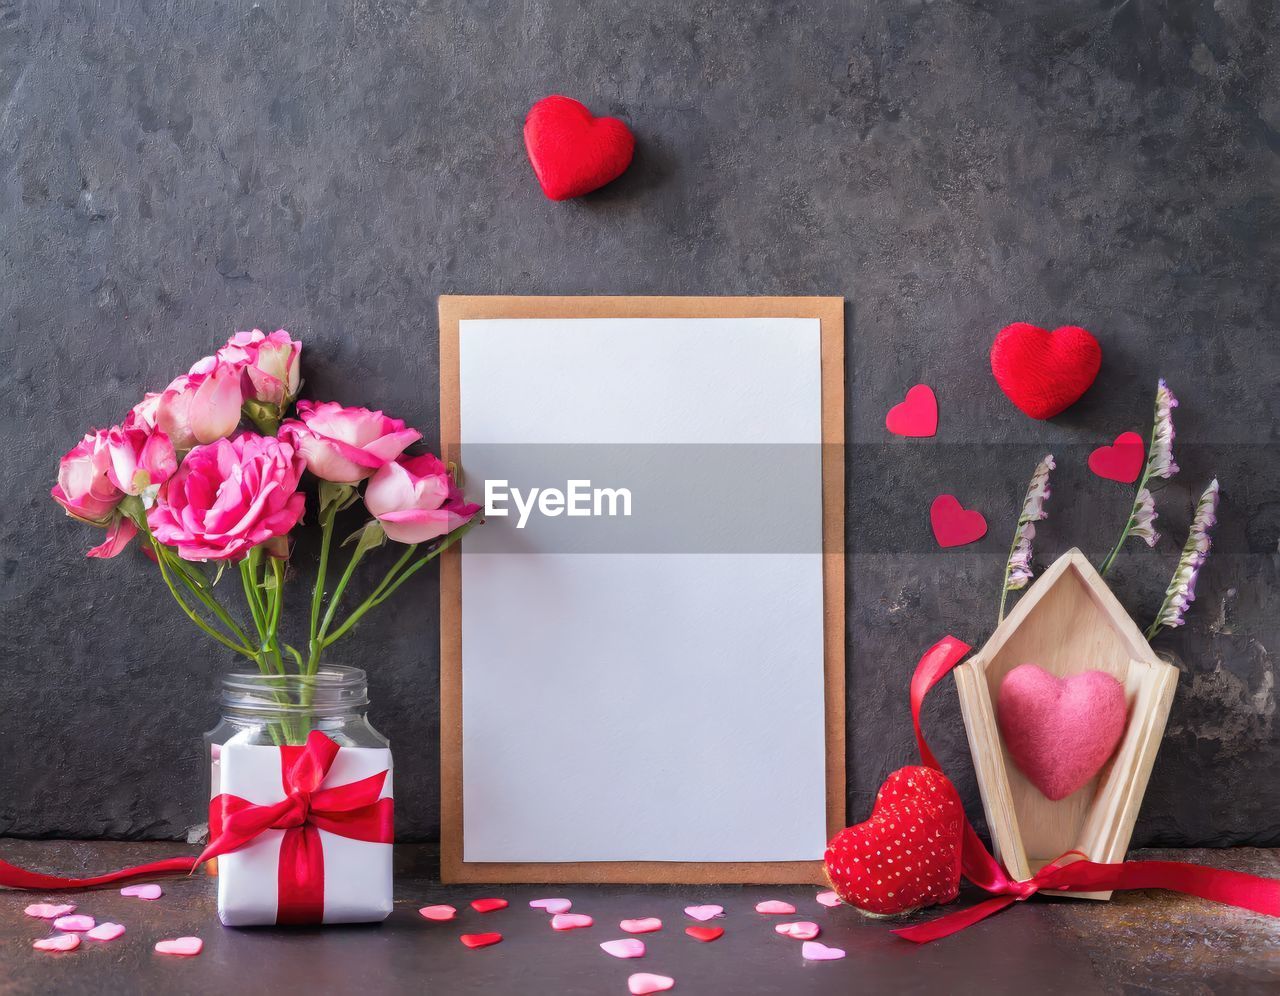 red, pink, flower, plant, petal, flowering plant, nature, indoors, no people, beauty in nature, still life, studio shot, wood, freshness, rose, copy space, ribbon, table, art, emotion, decoration, gift, heart shape, valentine's day, paper, arrangement, positive emotion, love, celebration, food and drink, gray, box, holiday